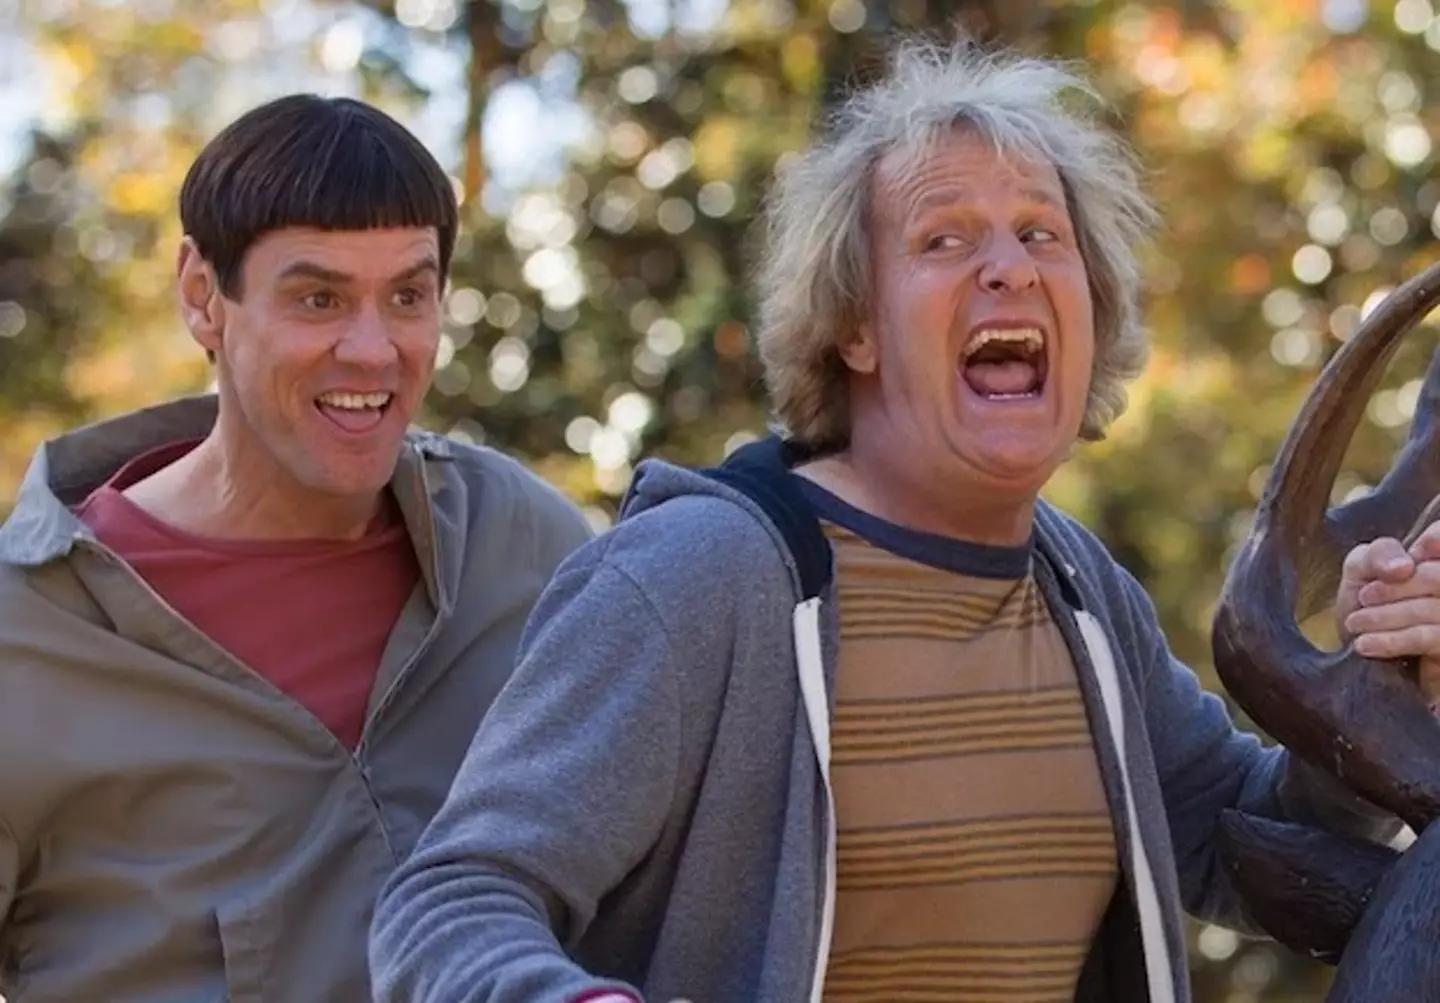 Dumb and Dumber To was not as successful as the first film.